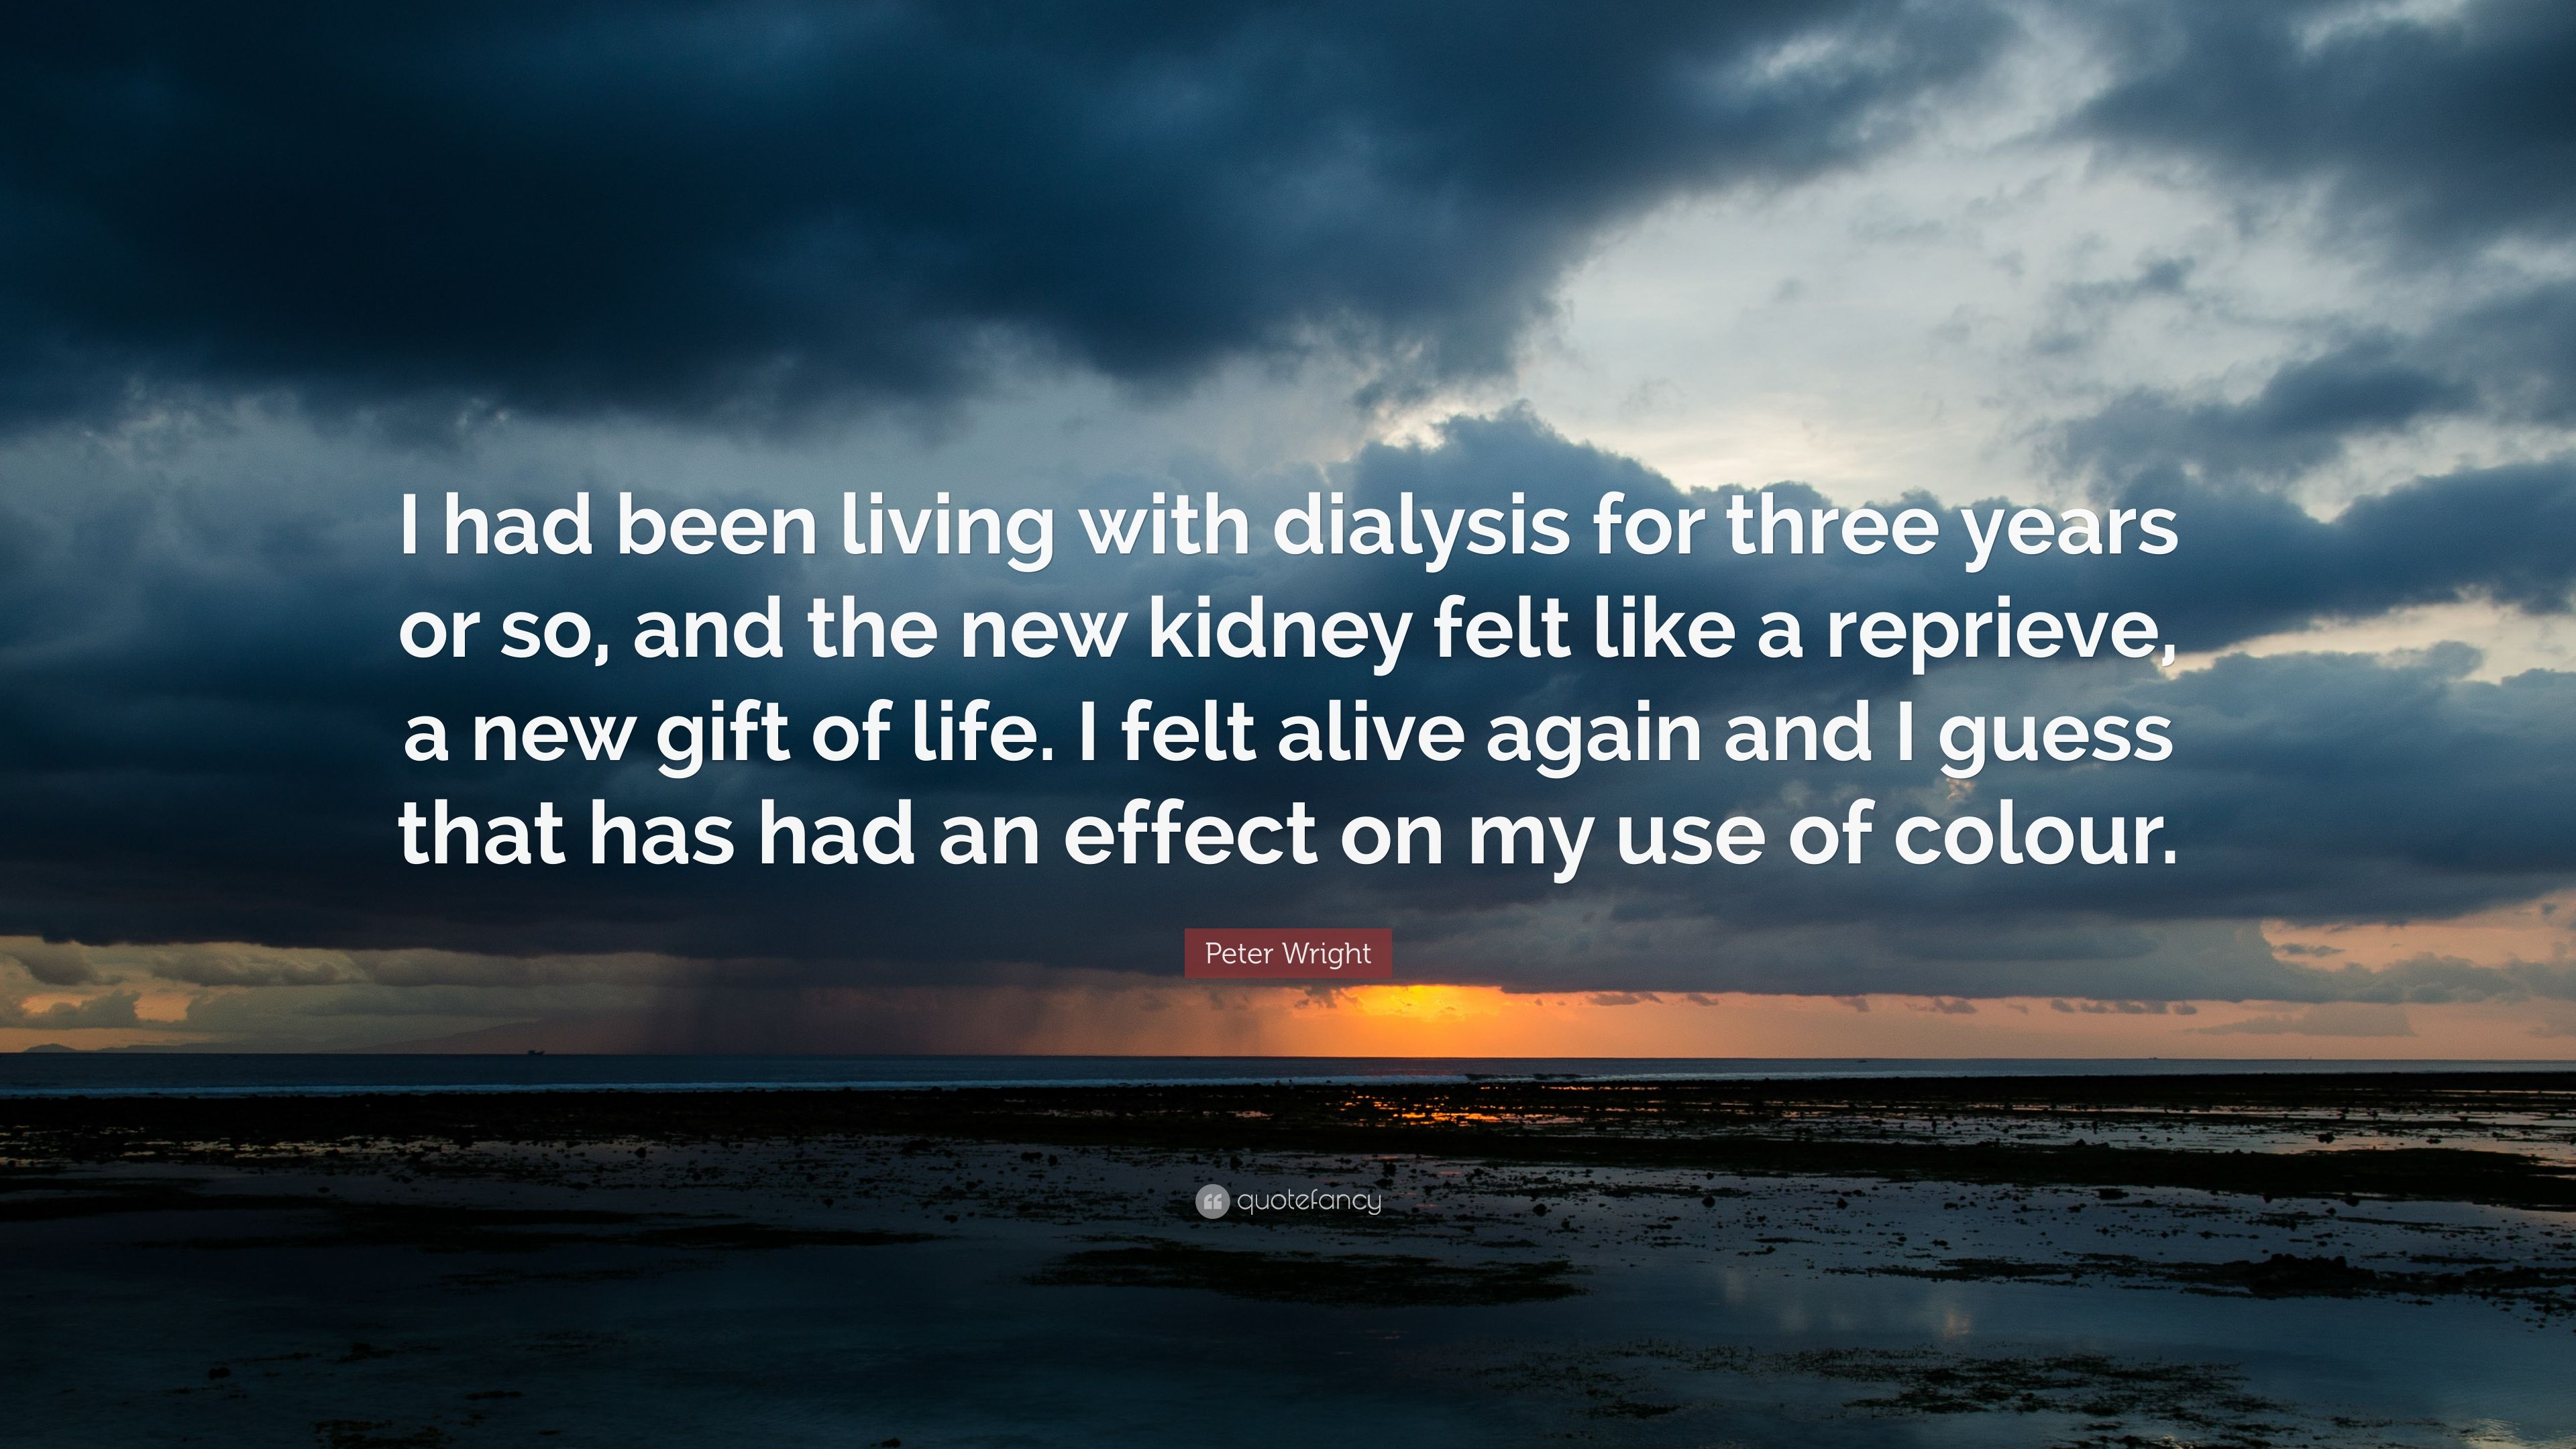 Peter Wright Quote: “I had been living with dialysis for three